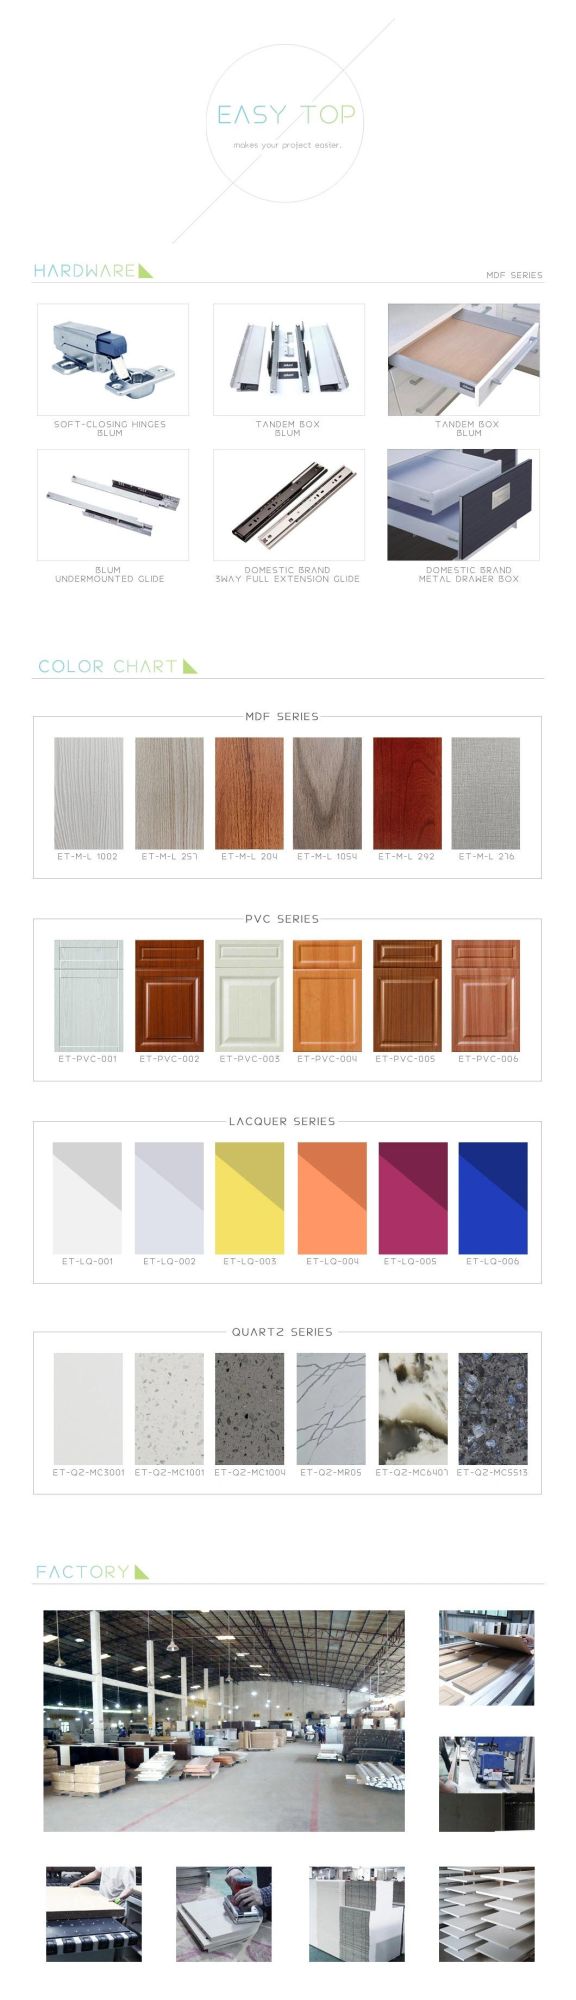 White Flat Cupboard Soft-Closing Hinges Joinery Drawer Complete Fitted Tall Display Kitchen Units Cabinets